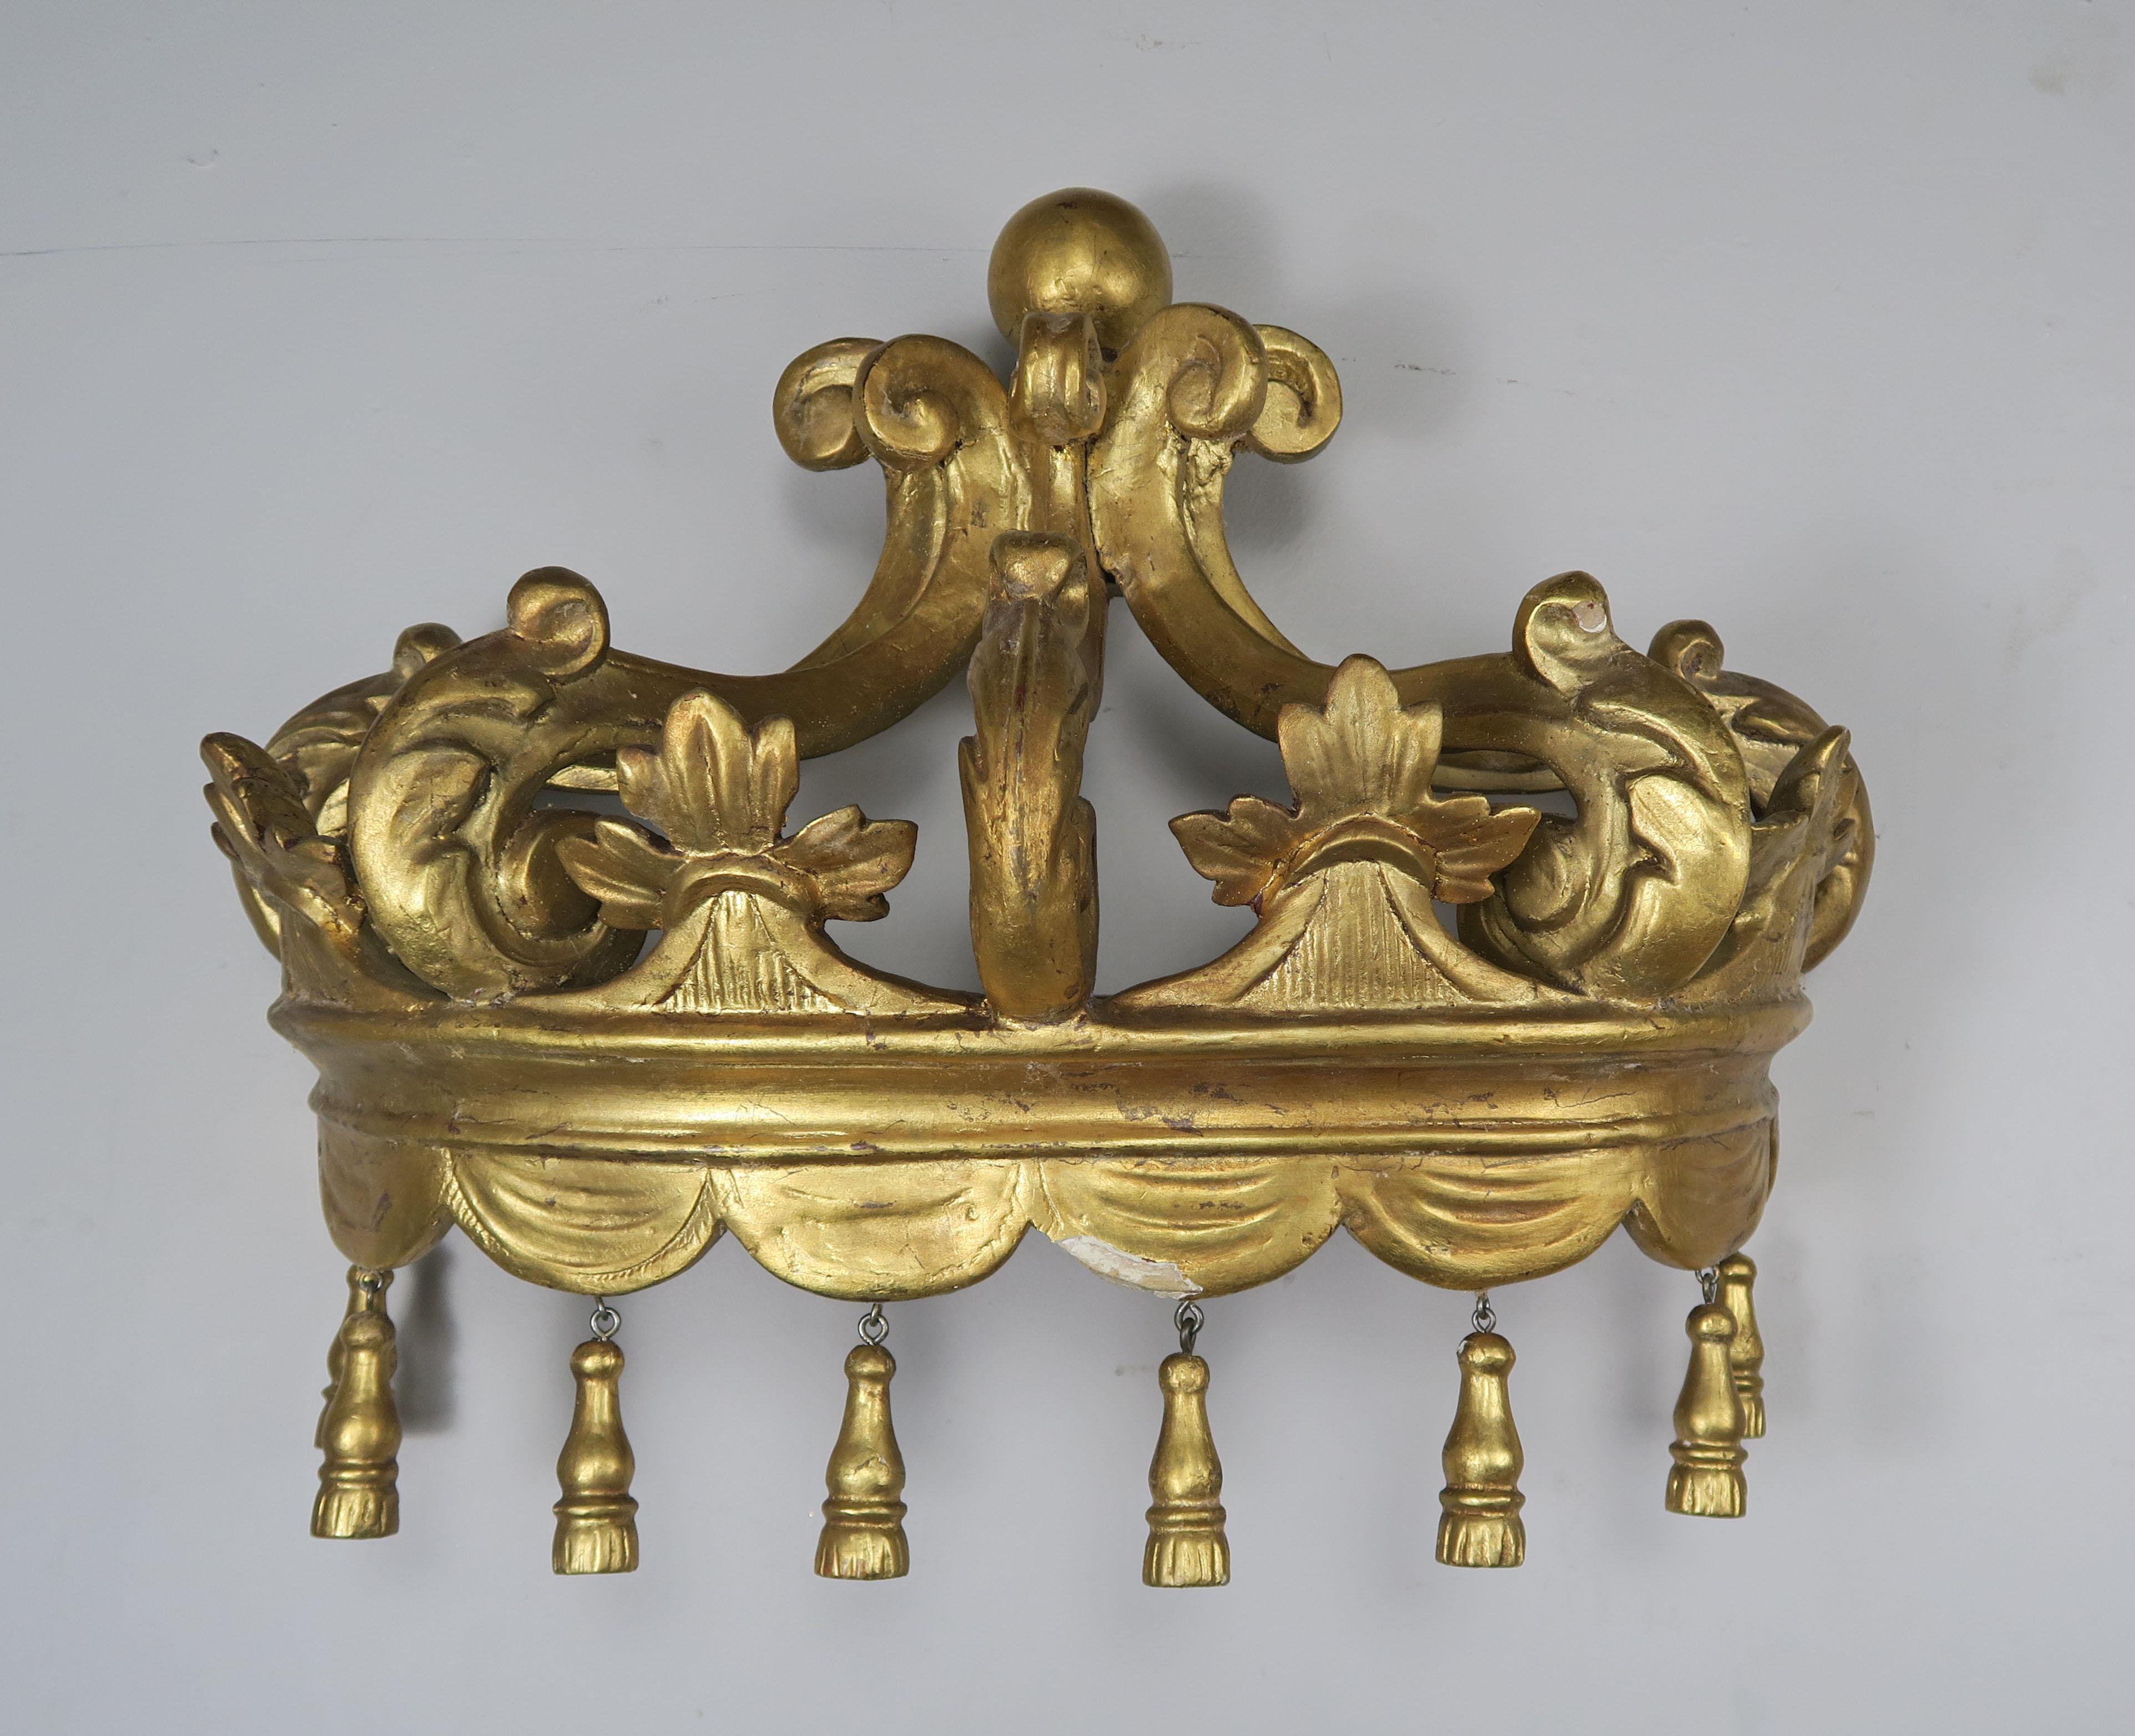 Baroque Italian Giltwood Carved Bed Corona with Tassels, circa 1900